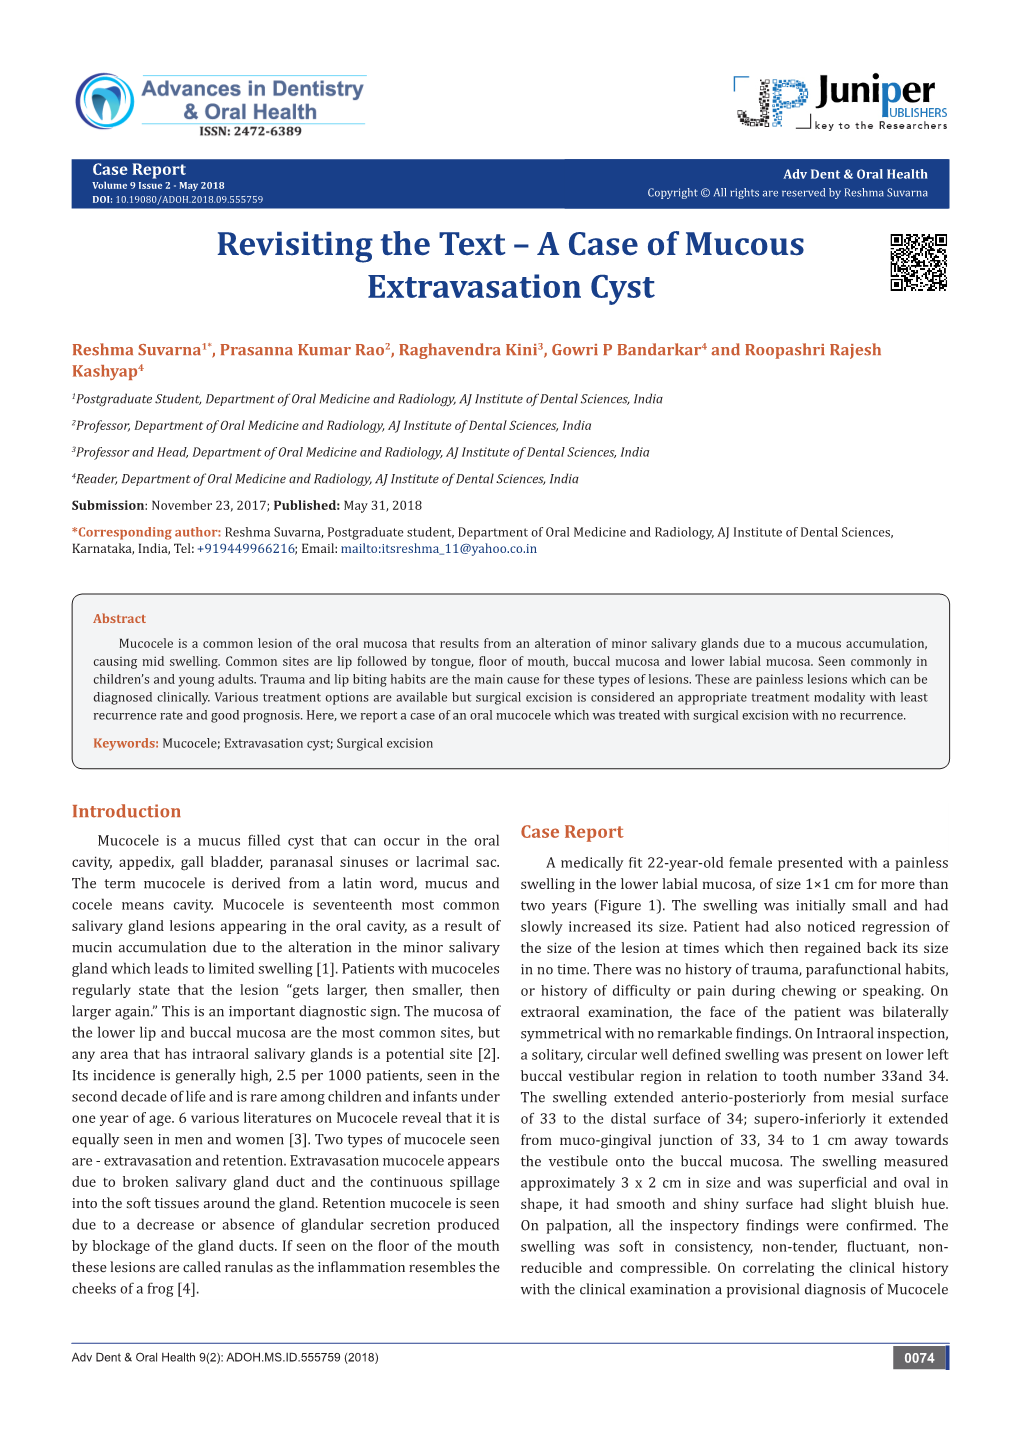 Revisiting the Text – a Case of Mucous Extravasation Cyst